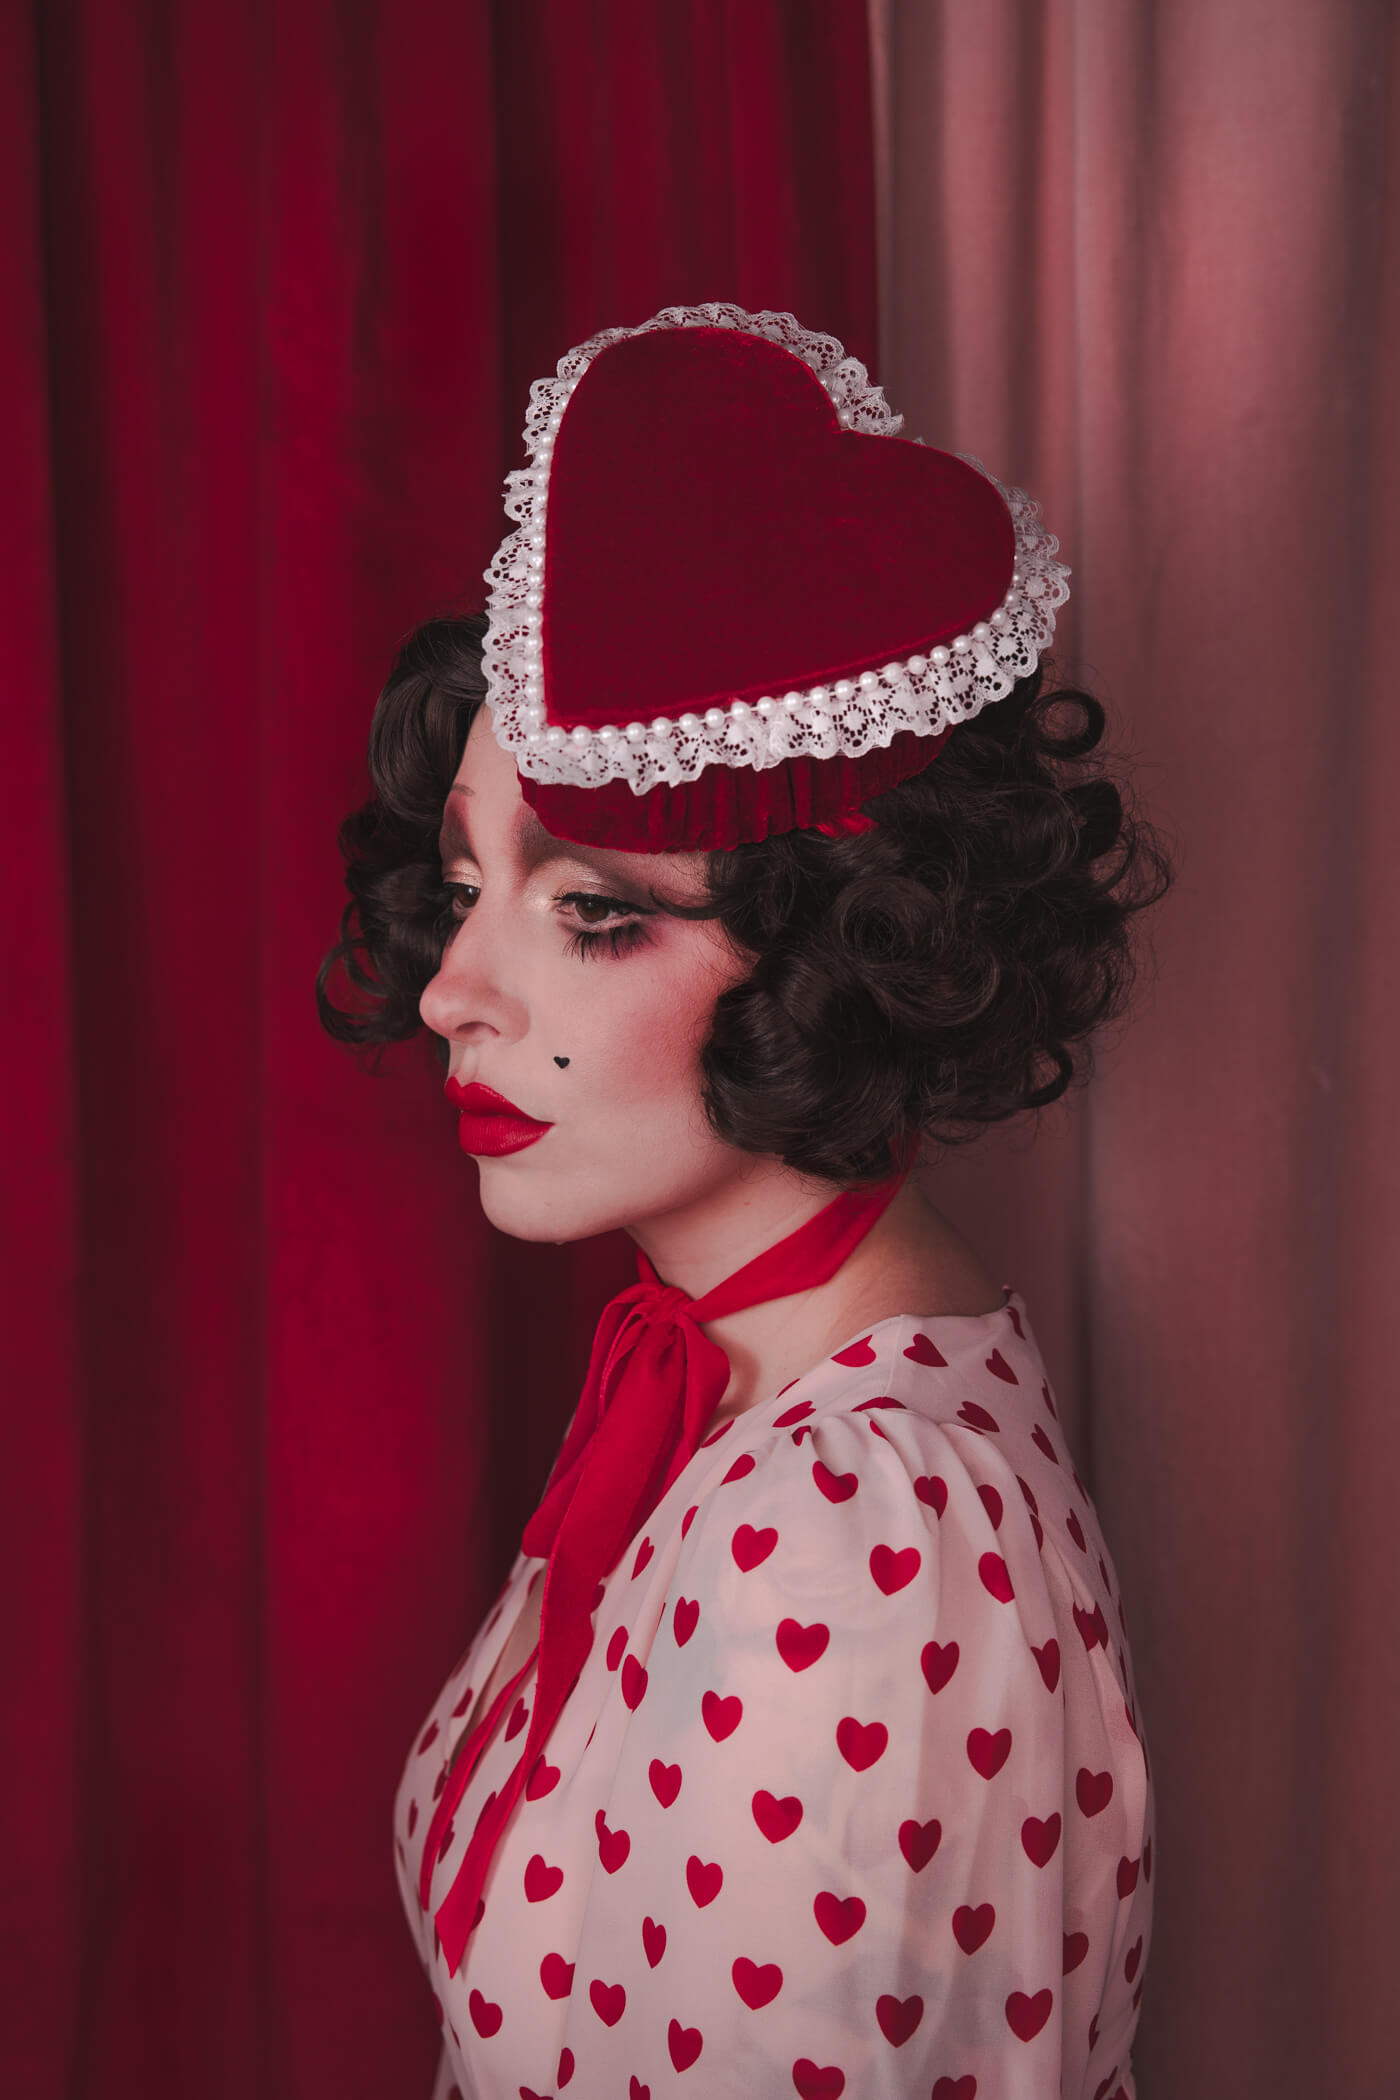 Pale girl with dark 20s 30s style hair and makeup, wearing a red velvet heart shaped box hat